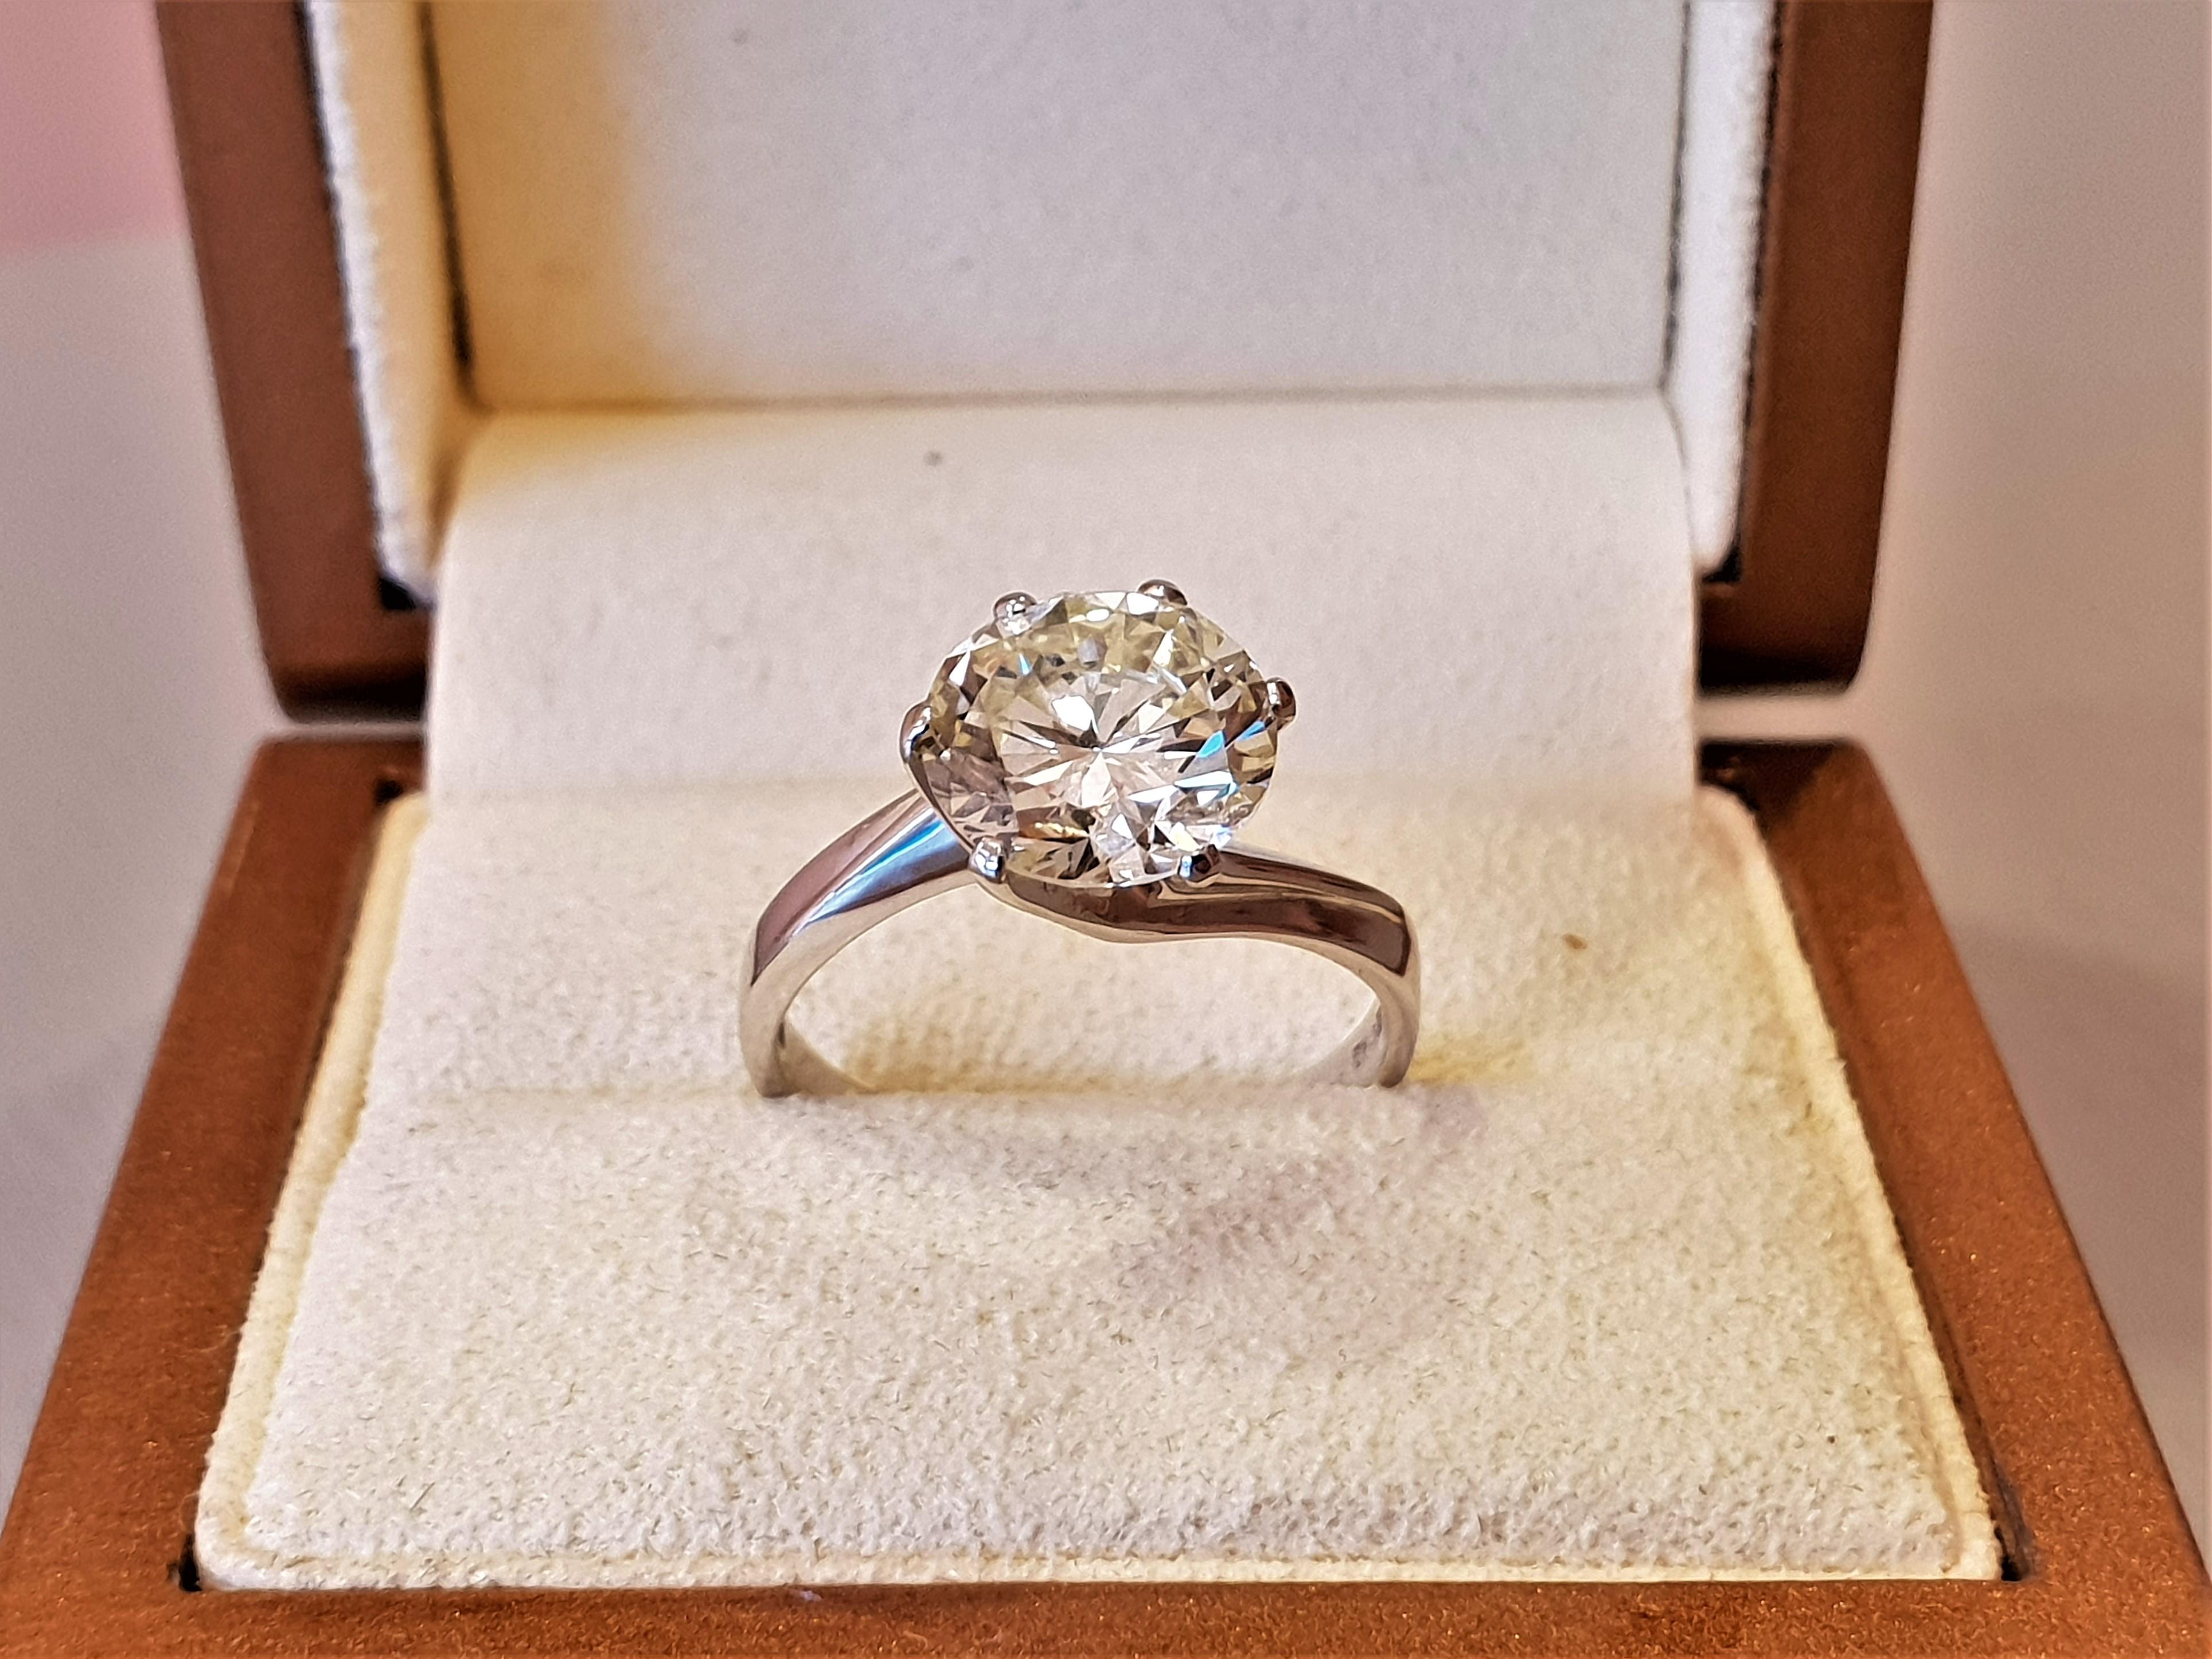 White 18k Gold engagement ring.
Certified 3.22 carat round cut diamond, M colour, Vs1 purity.
Size: 16 (Italy), 7.5 (USA)
Customizable and resizable.